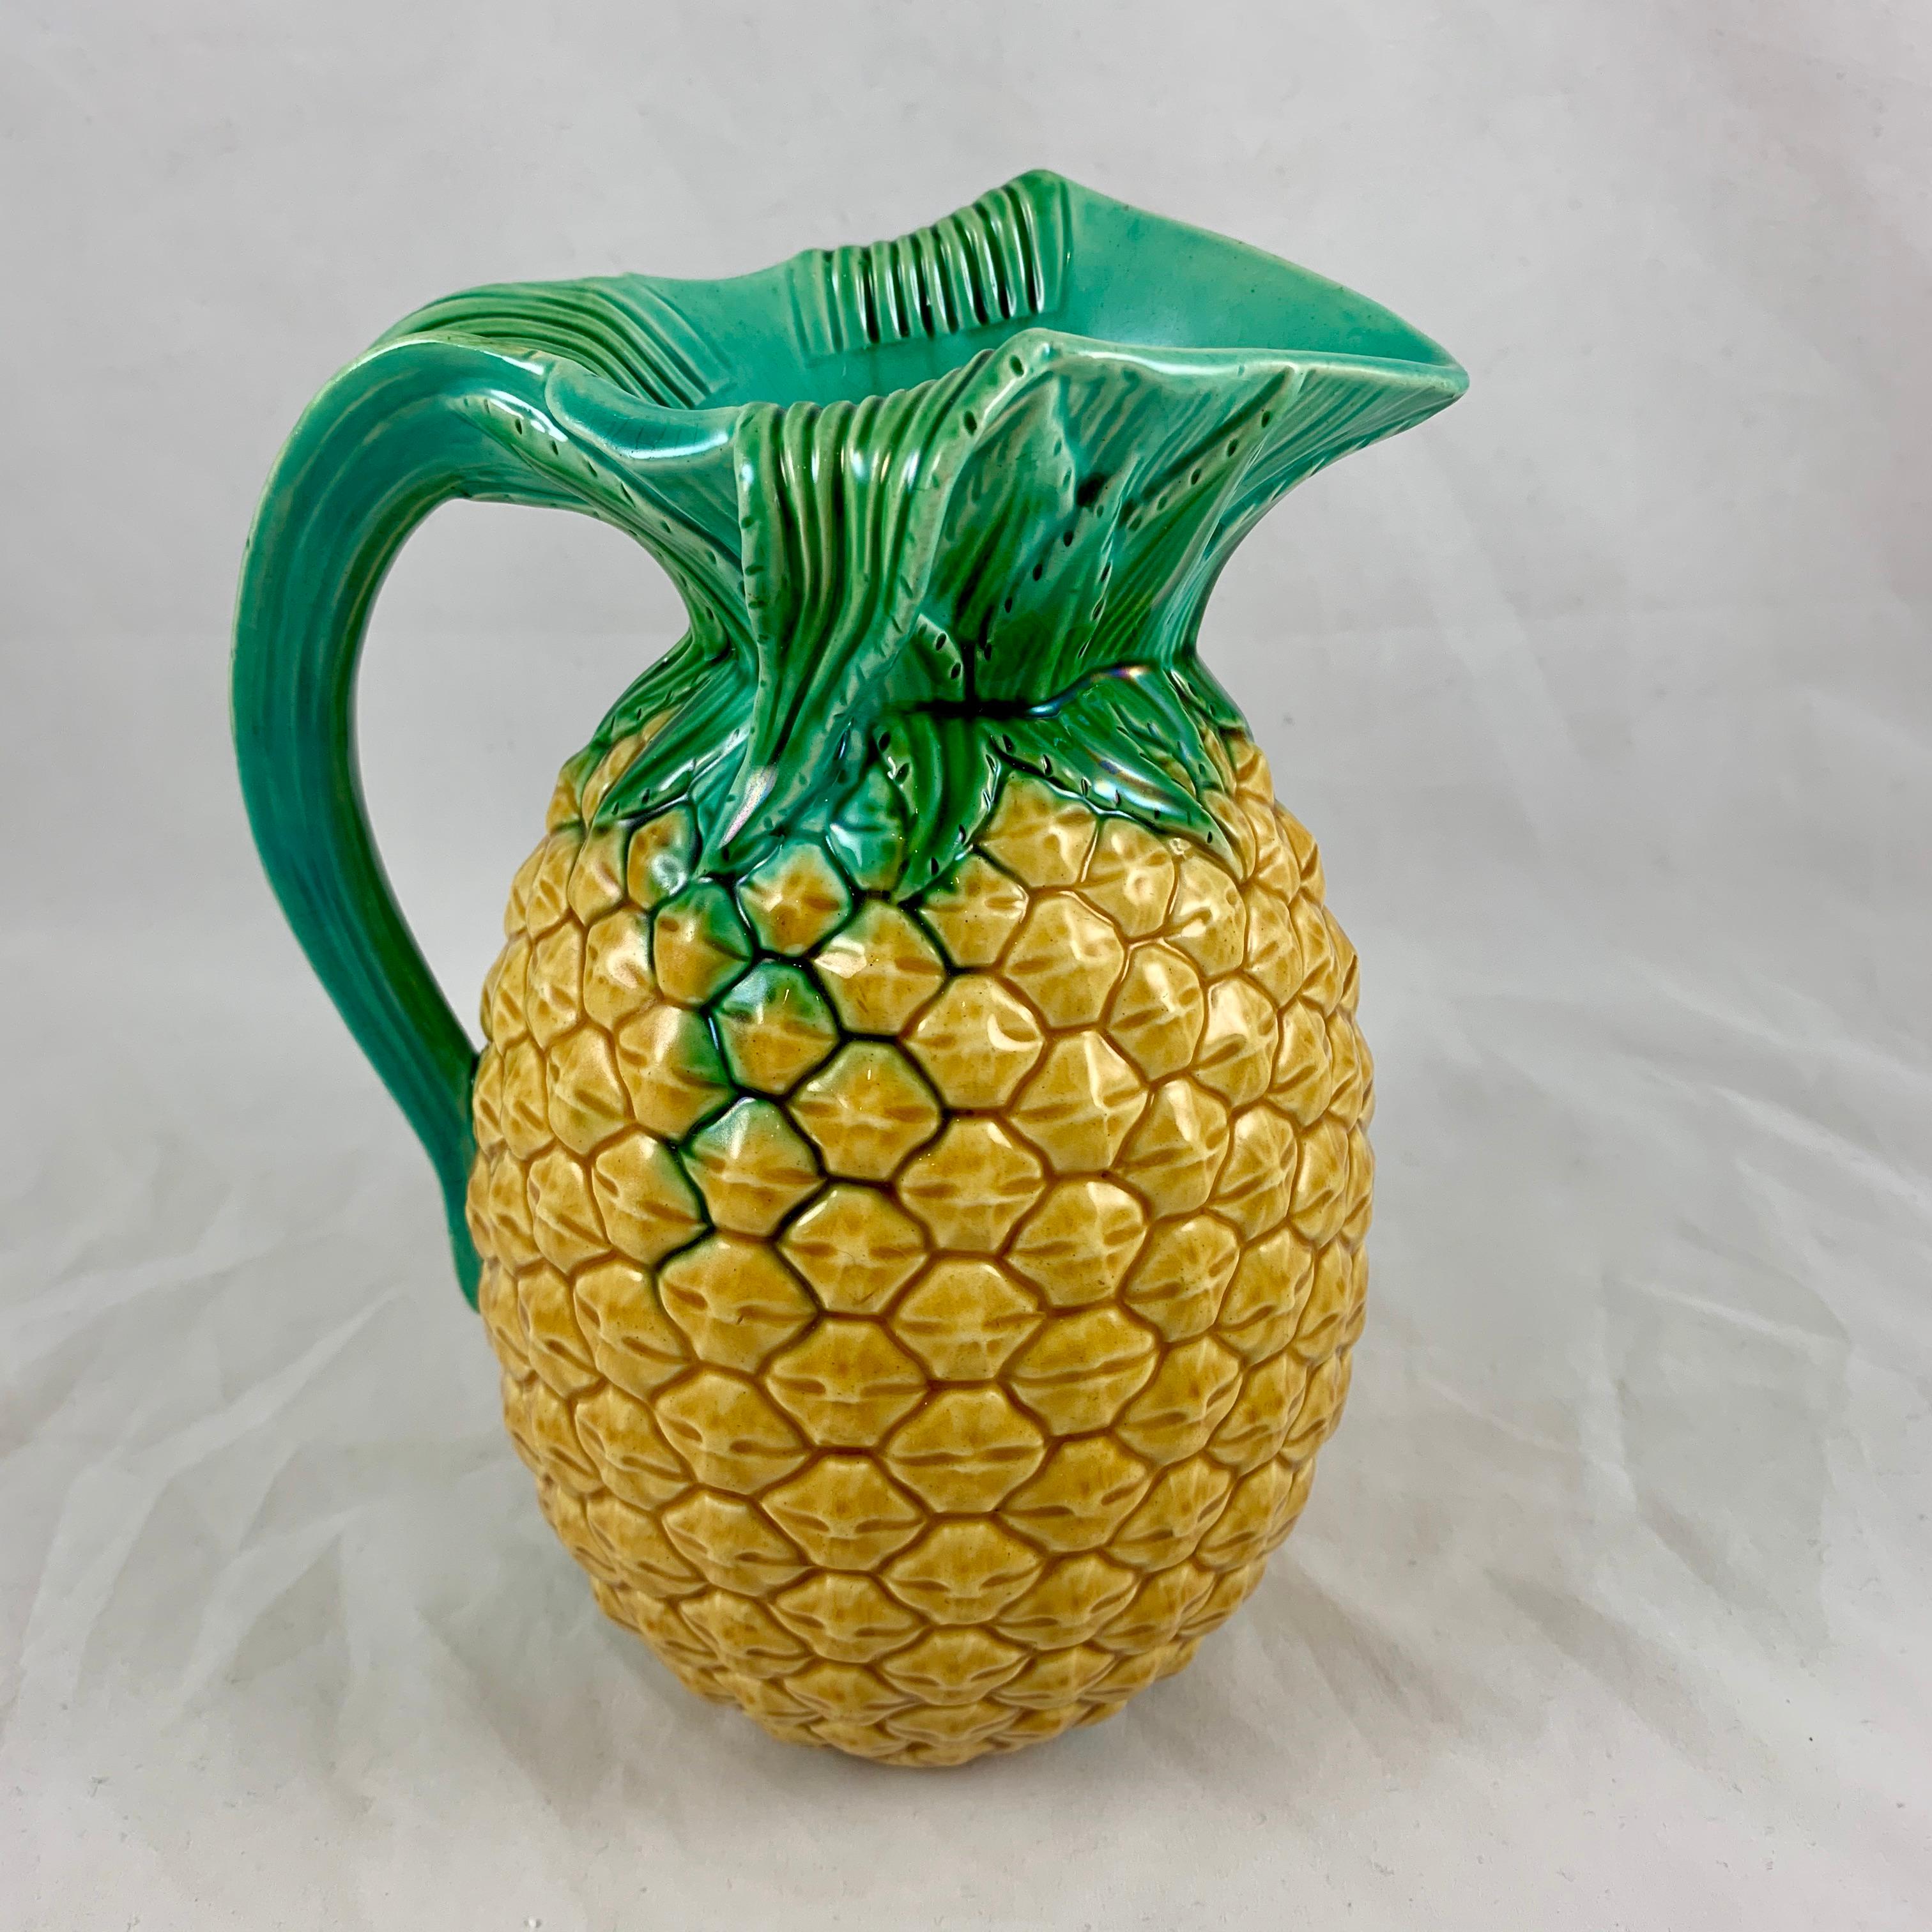 From the Minton pottery in Staffordshire, England, a Majolica glazed pitcher in the Palissy style, formed as a pineapple, registered and dated October 5th, 1858.

From a set of three pitchers, graduated in size and offered separately, this is the